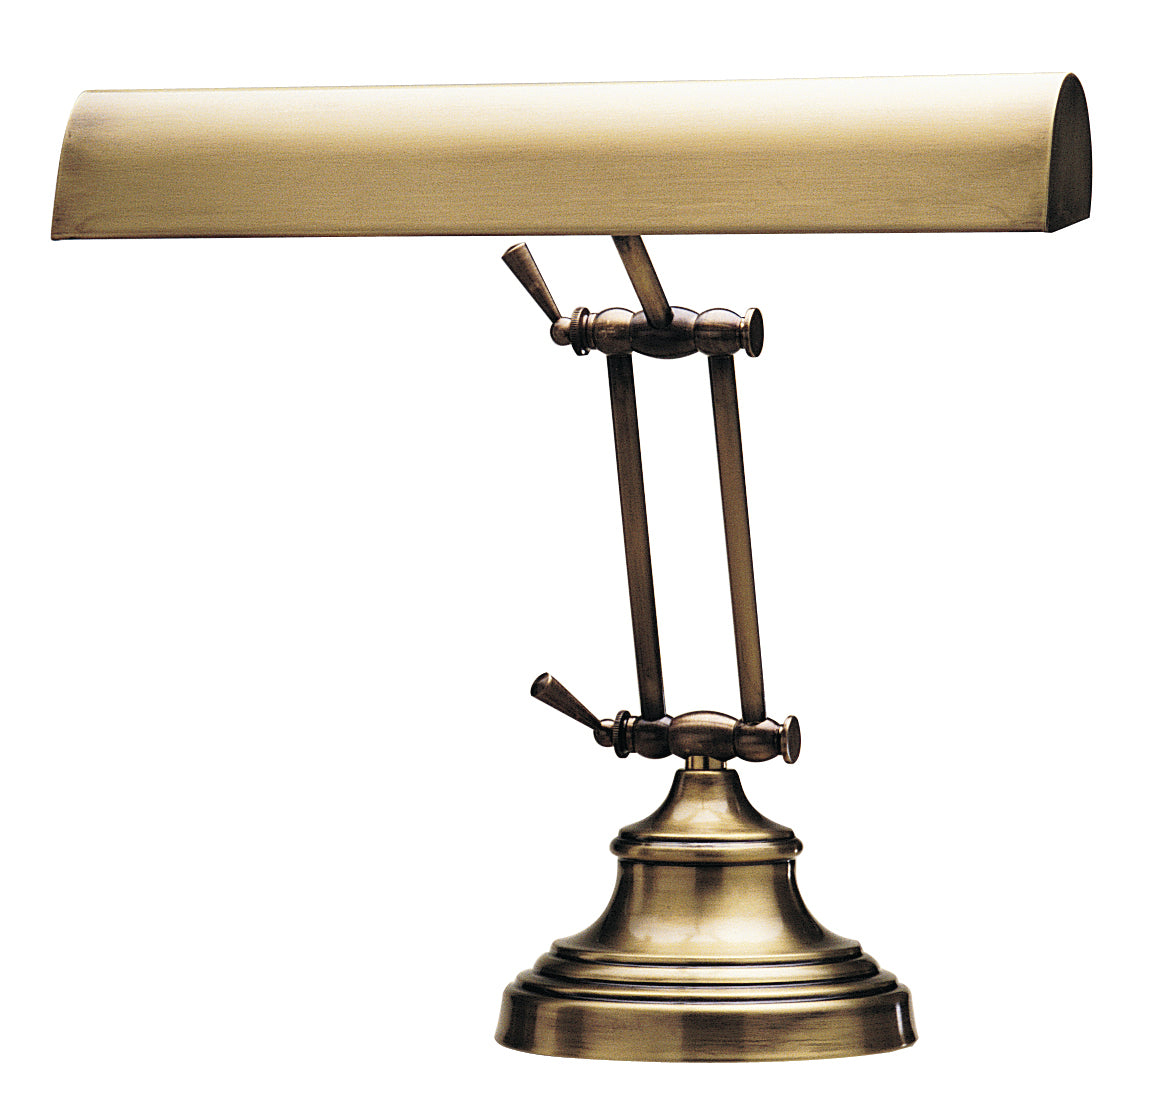 House of Troy Desk Piano Lamp 14" Antique Brass P14-231-71